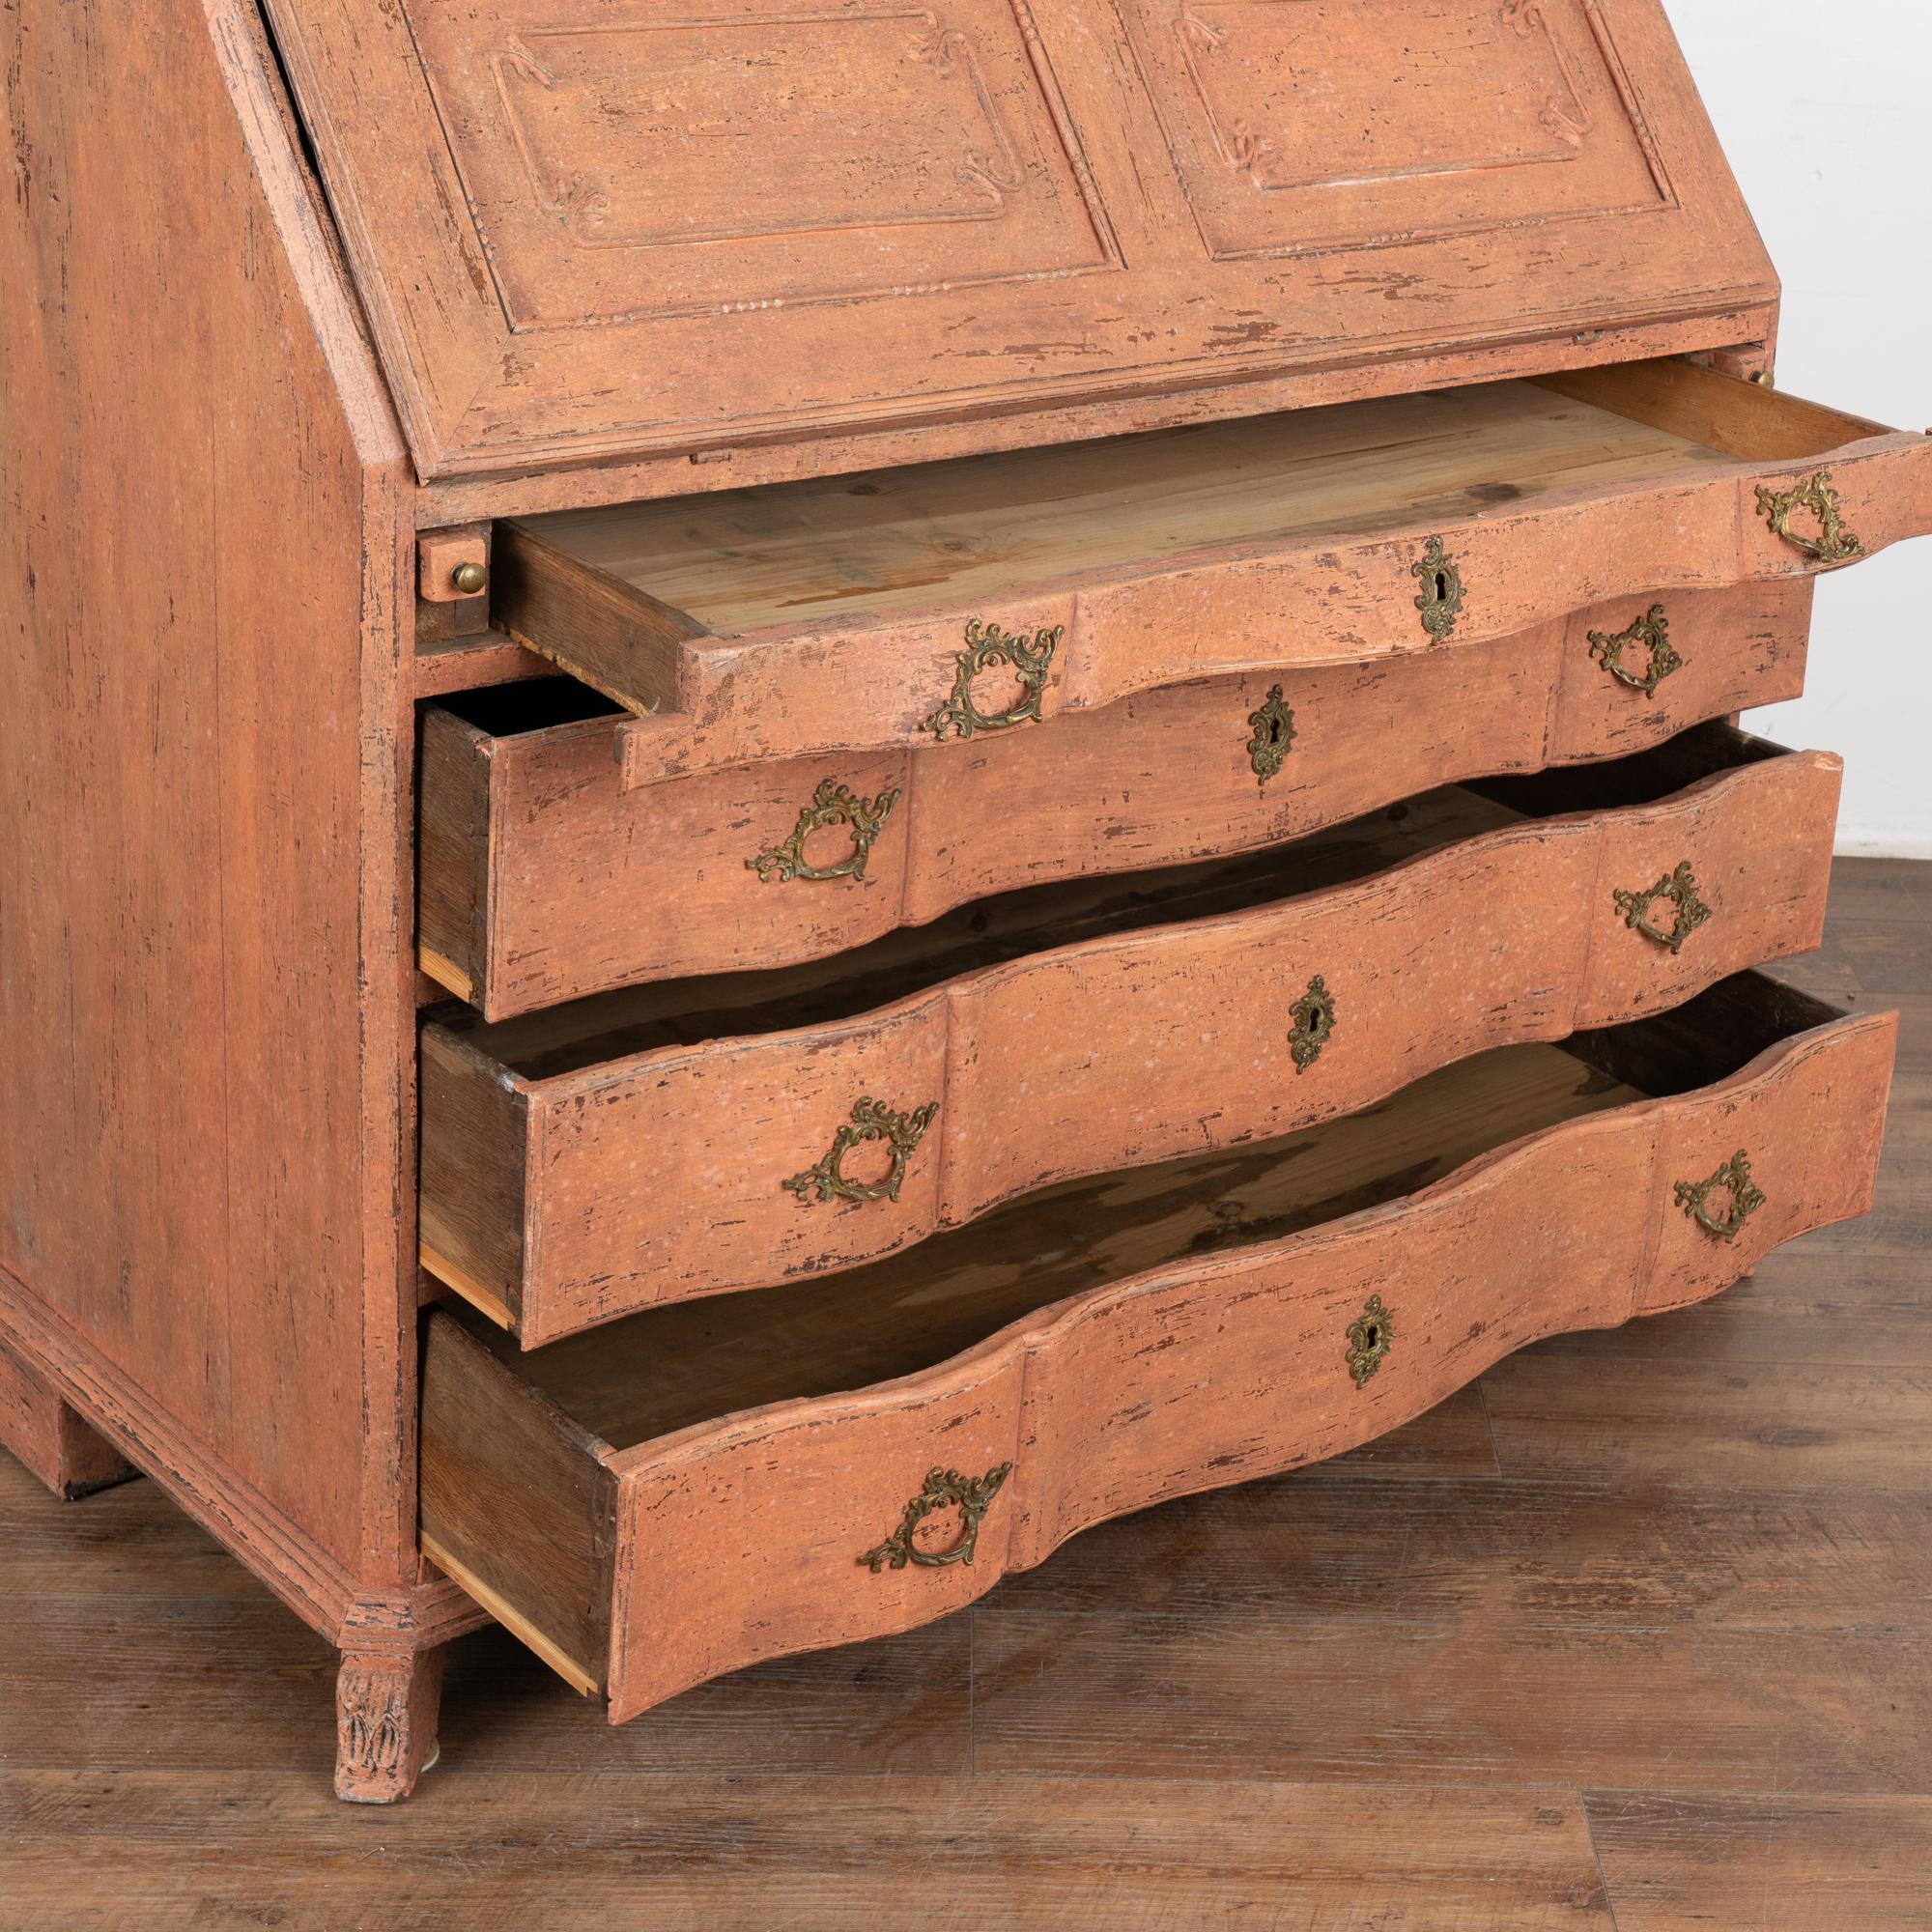 Oak Secretary Bureau With Painted Finish from Sweden circa 1760-1800 For Sale 3